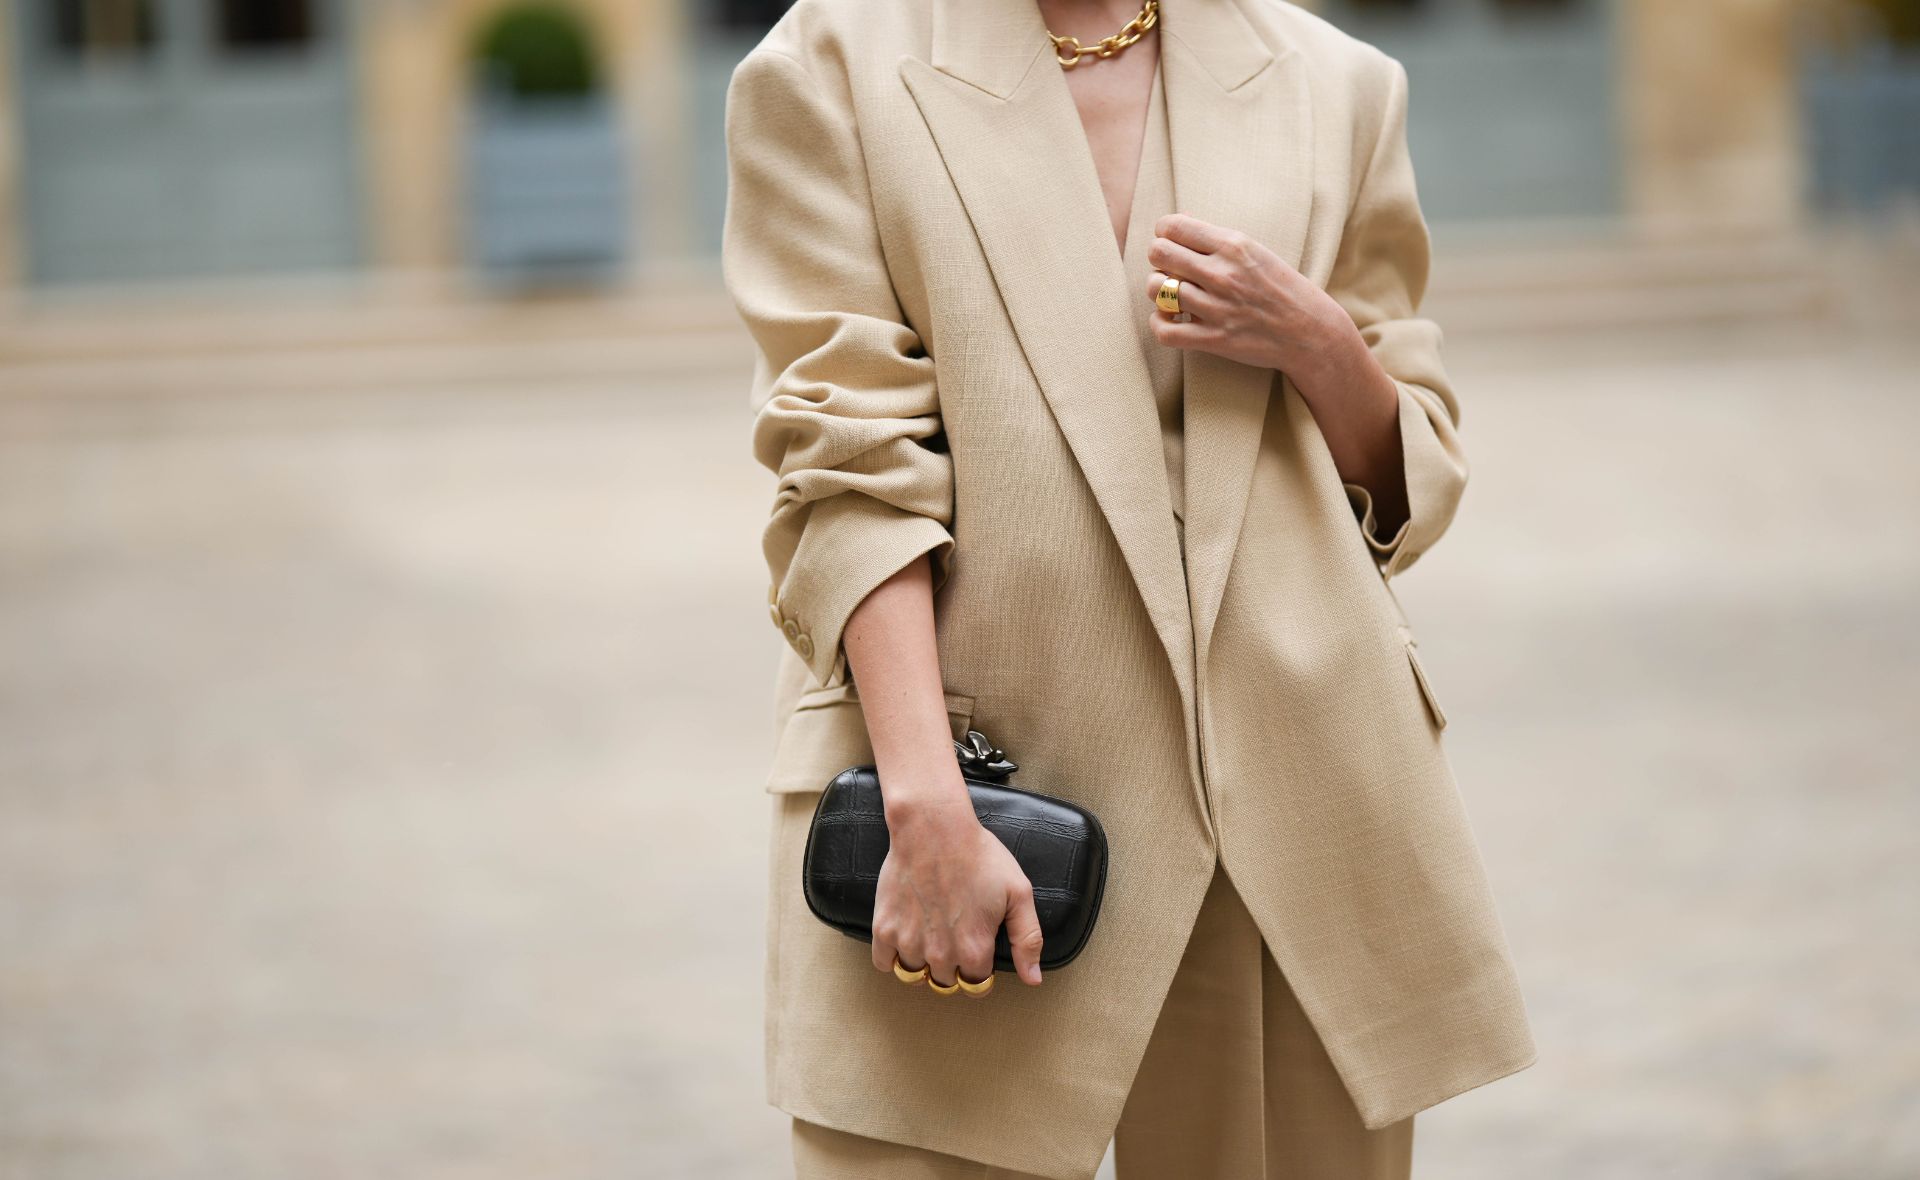 Power dressing has never been easier thanks to these chic blazers